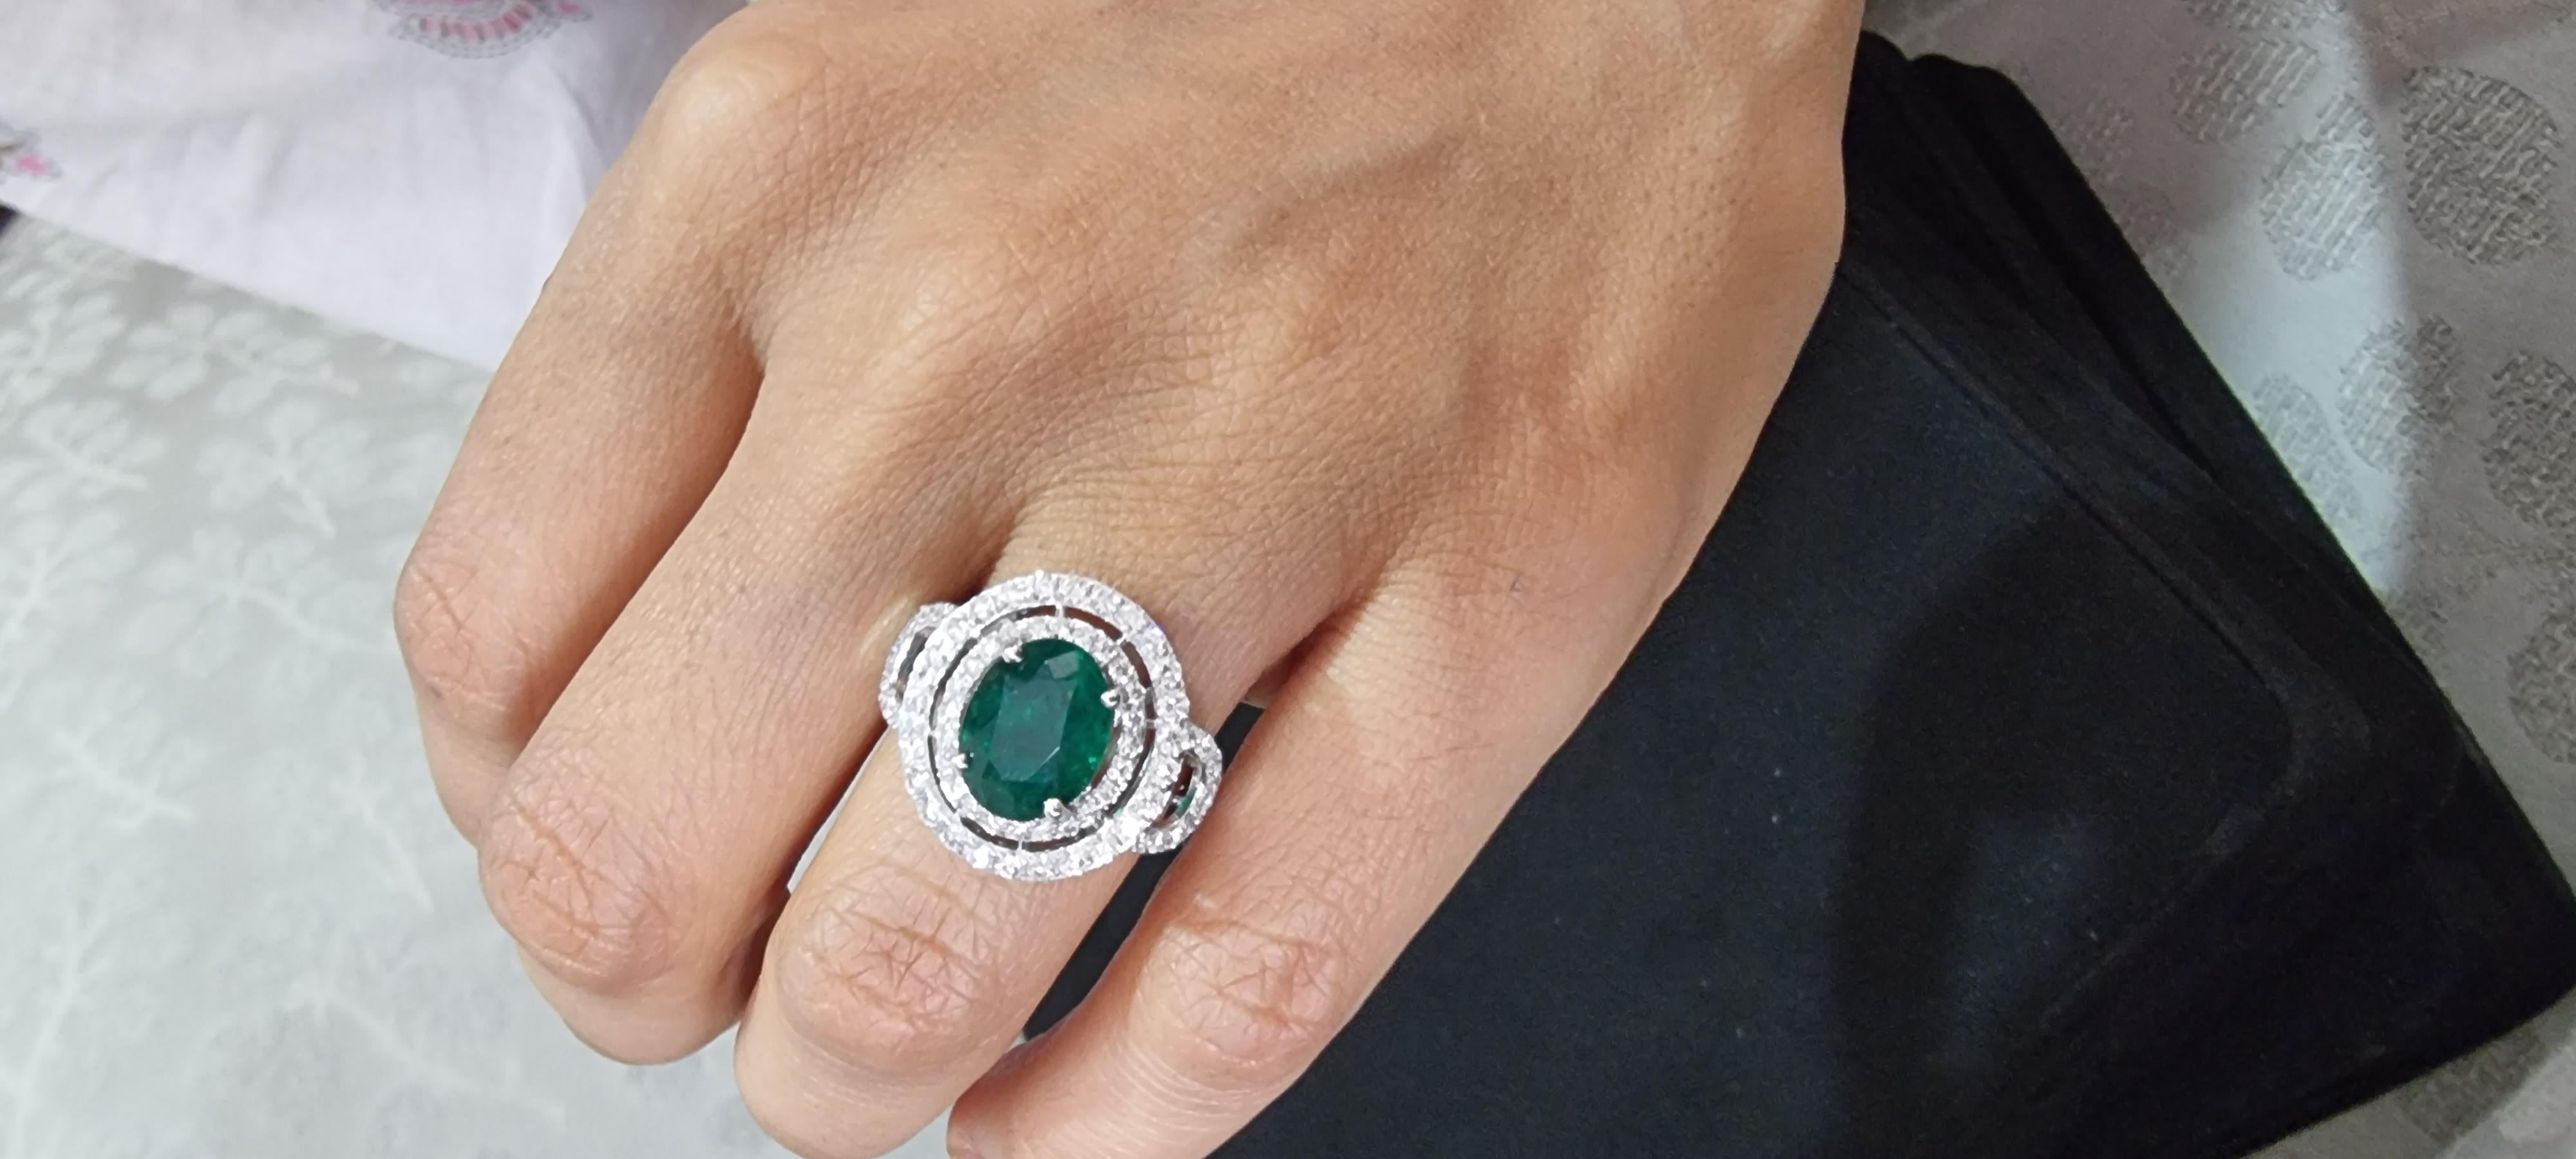 Women's 3.36cts Zambian Emerald Ring with 1.01cts Diamonds and 14k Gold For Sale